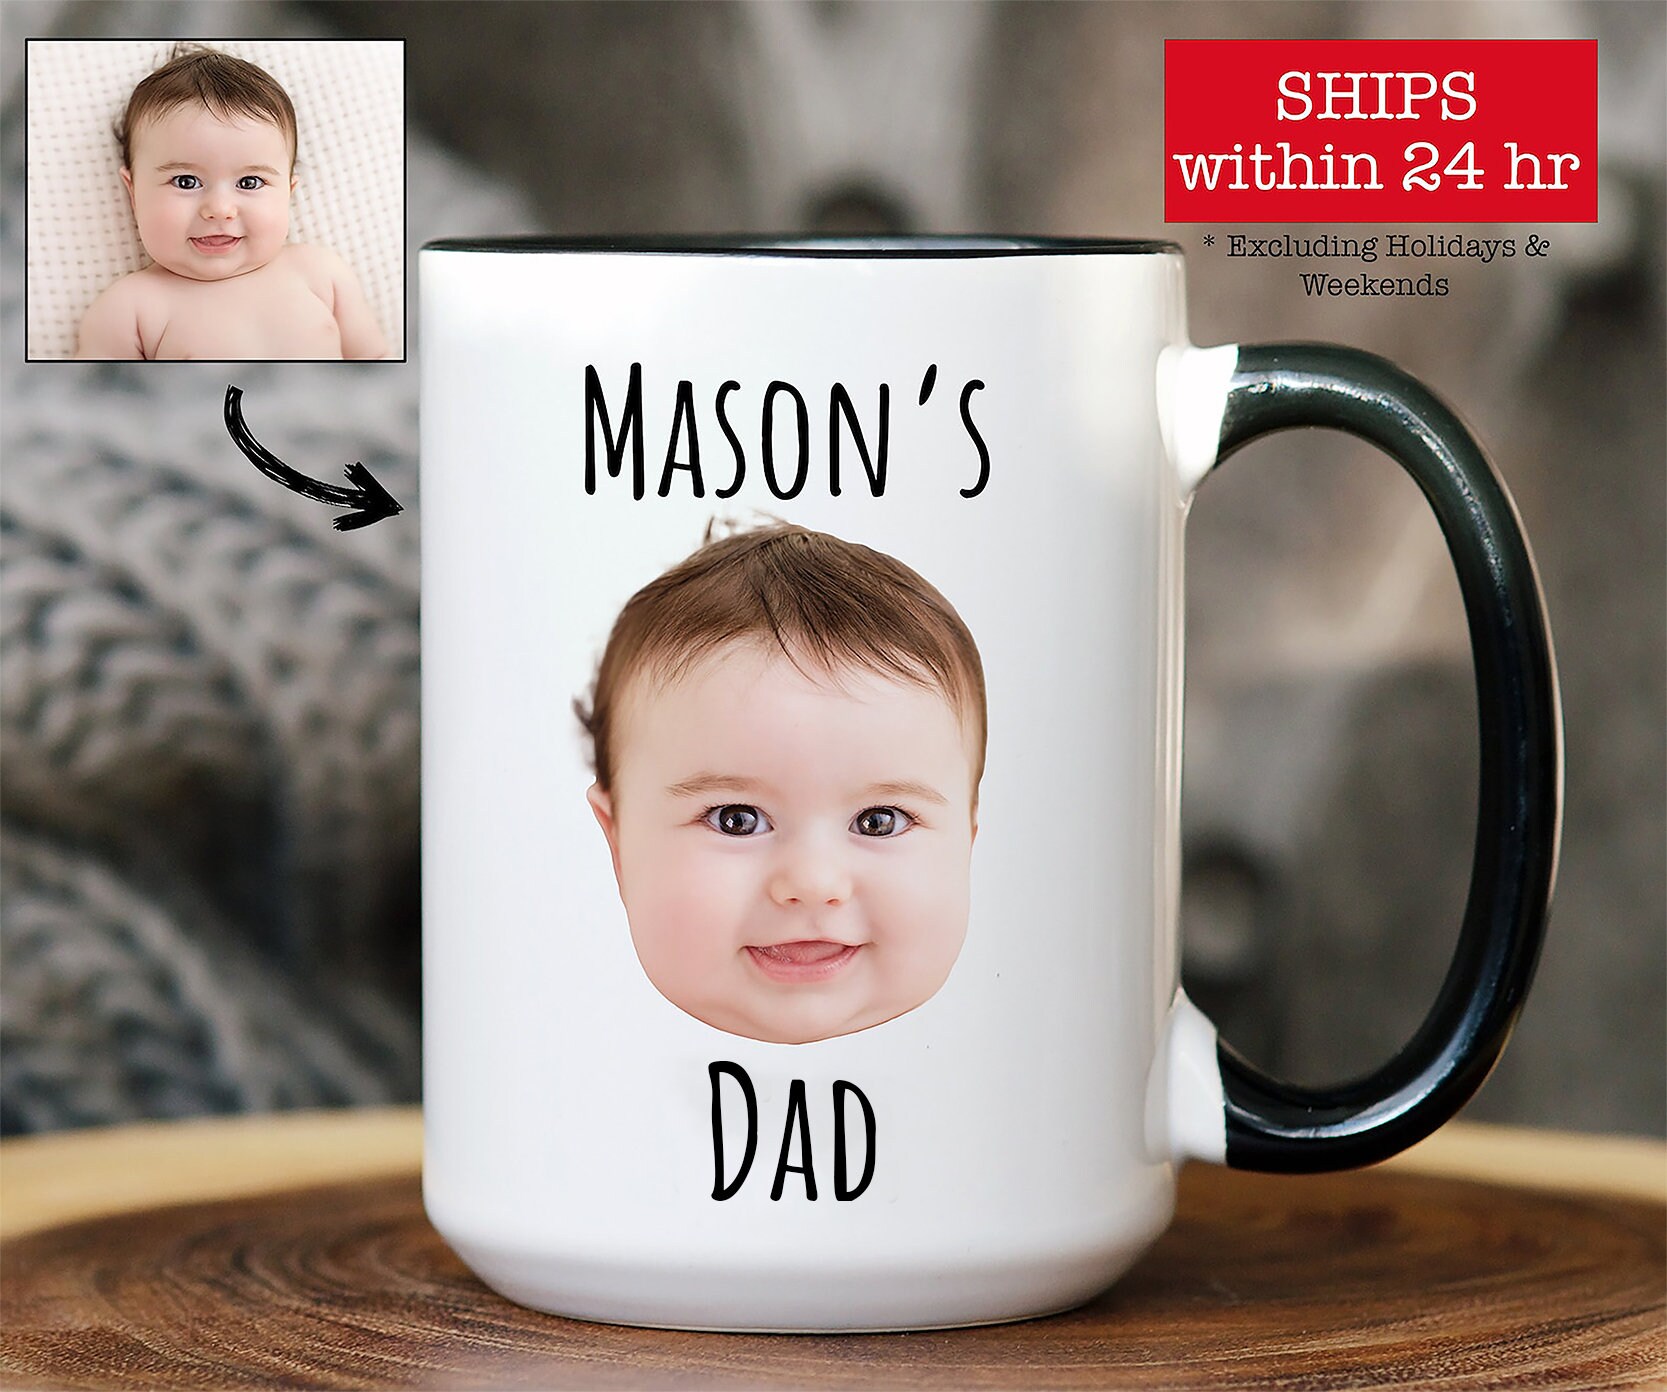 Discover Custom Baby Face Photo Coffee Mug, Mother's Day Baby / Kid Picture Mug, Fathers Day Personalize Child Image Coffee Mug